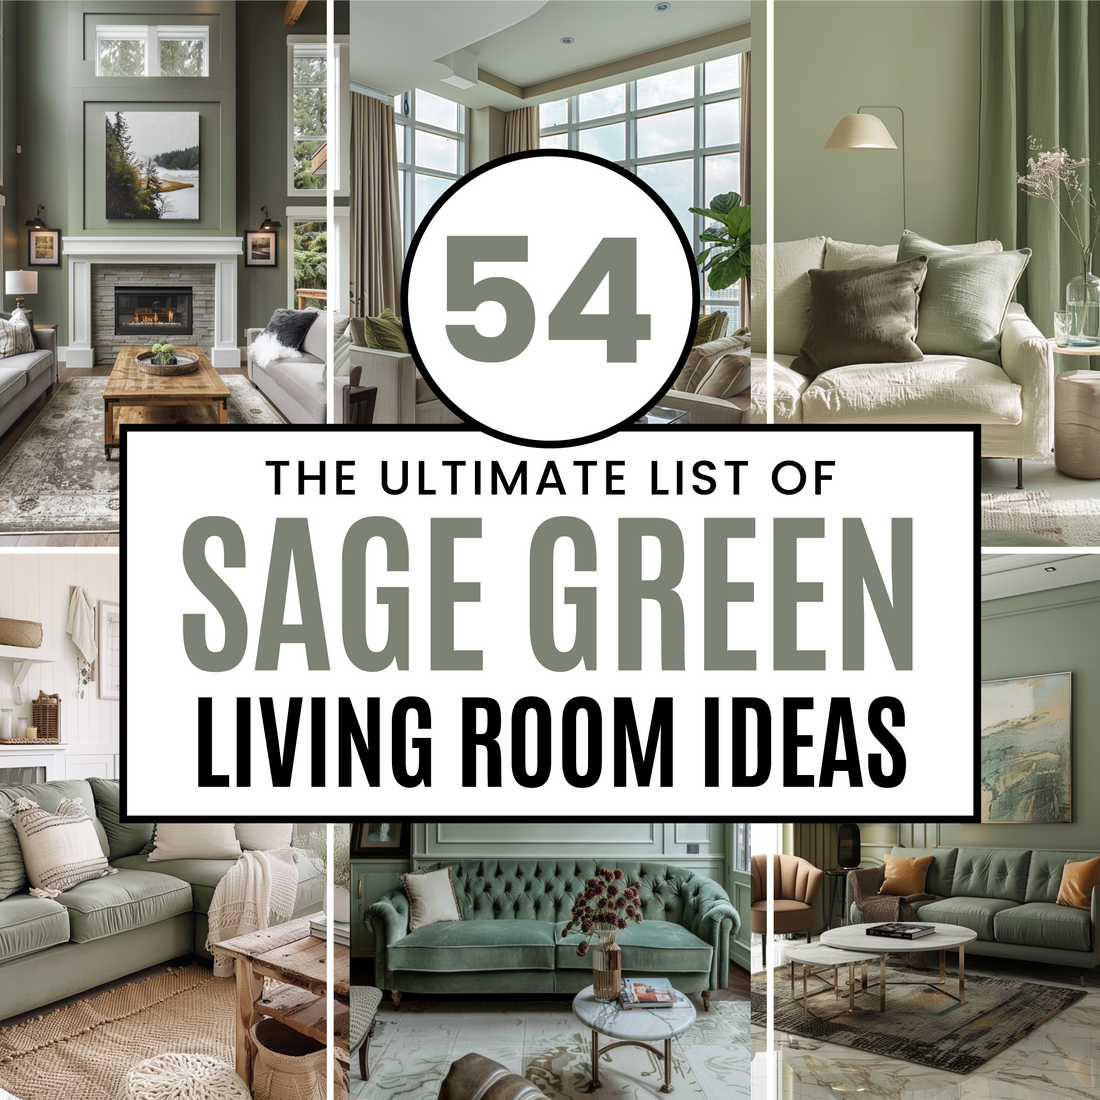 50+ Sage Green Living Room Ideas for A Modern and Cozy Home